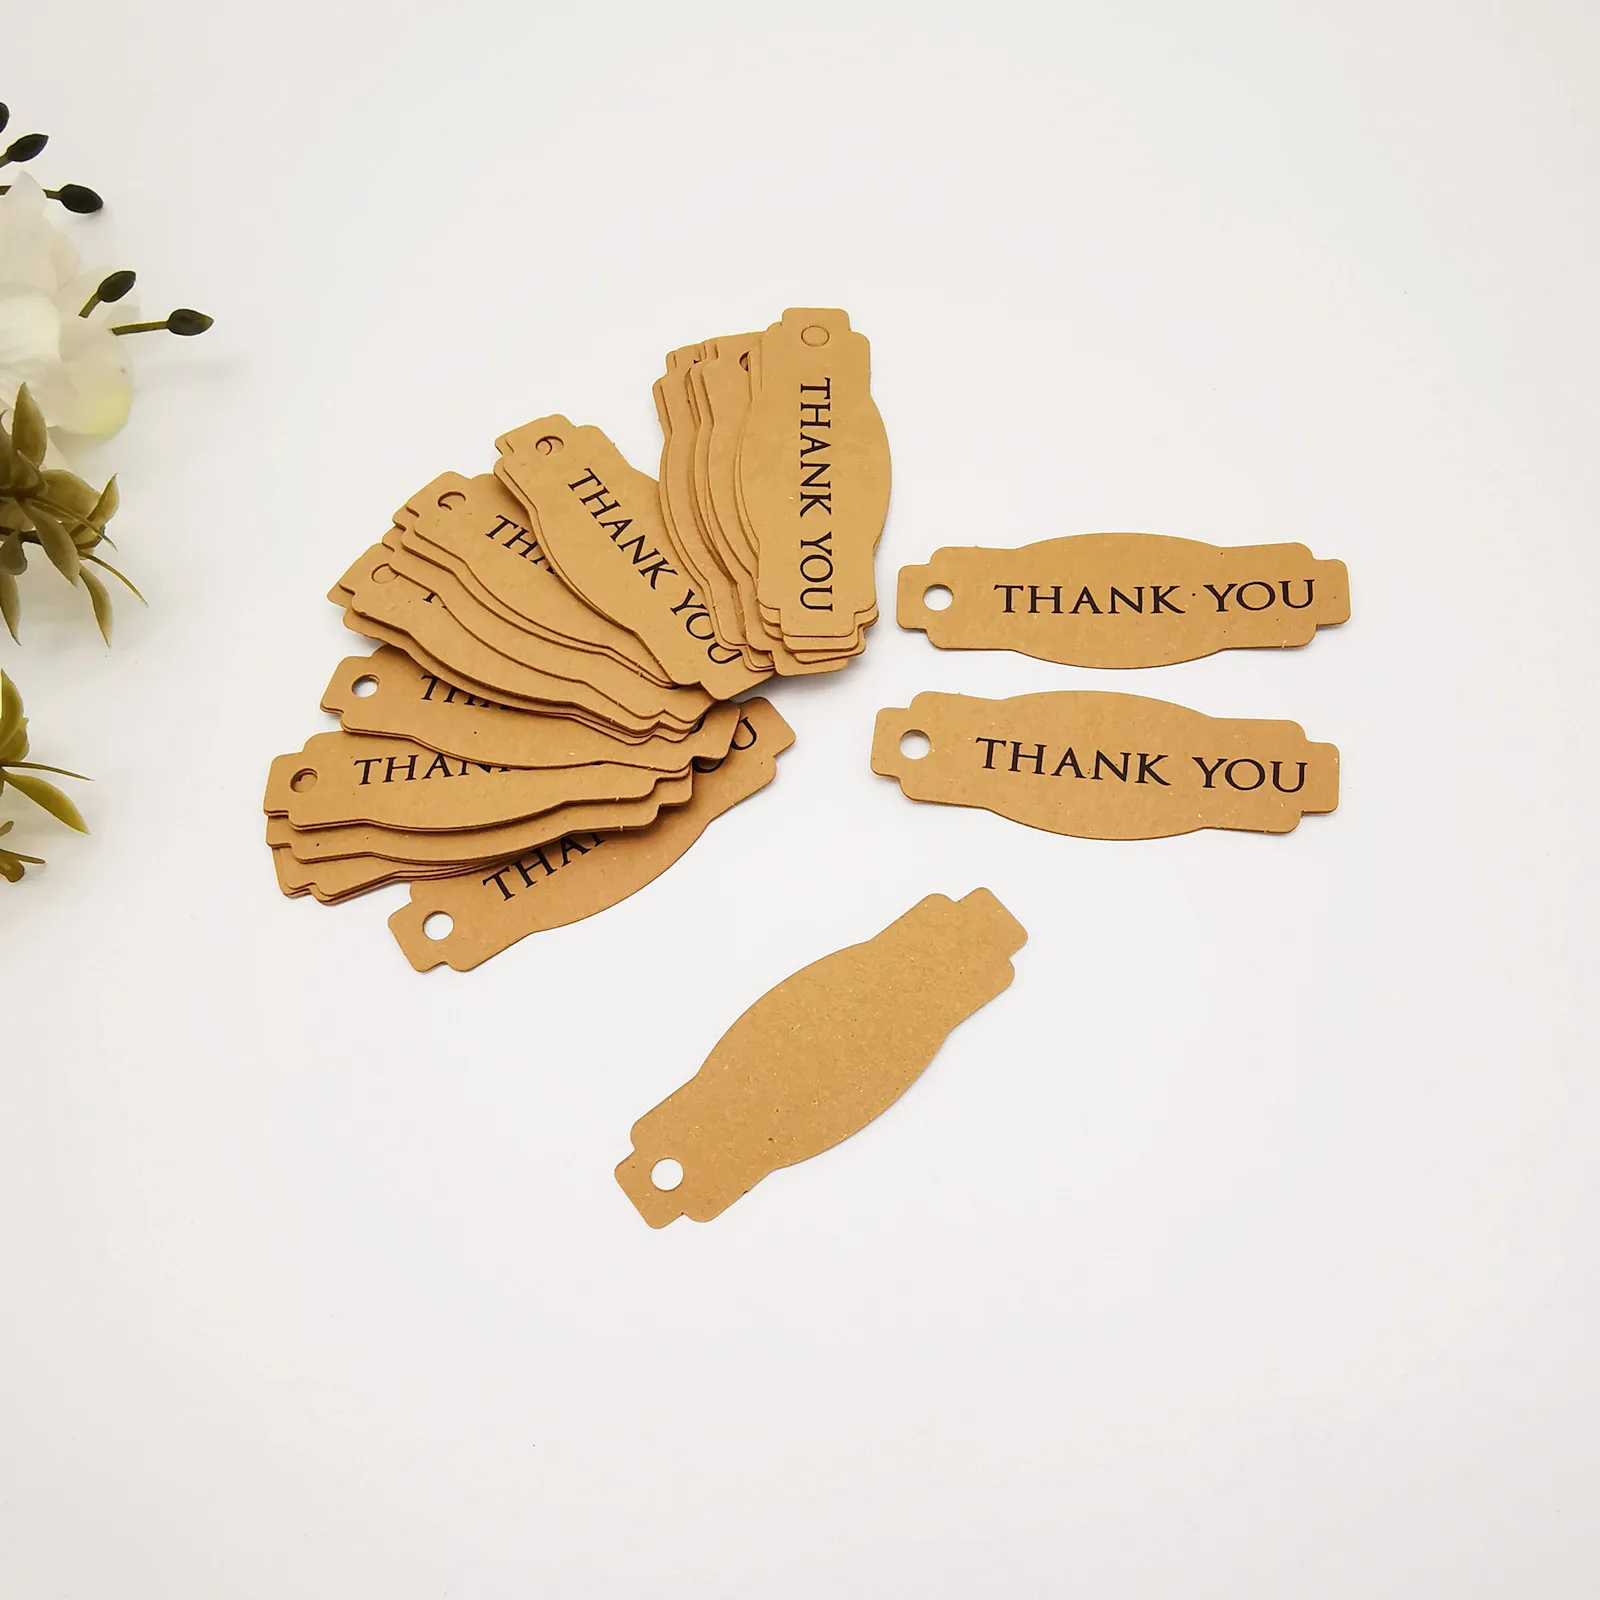 
Kraft Paper Little Gift Box Ornaments Thank You Note Candy Box Decorations Small Decorative Items  (1600292601046)